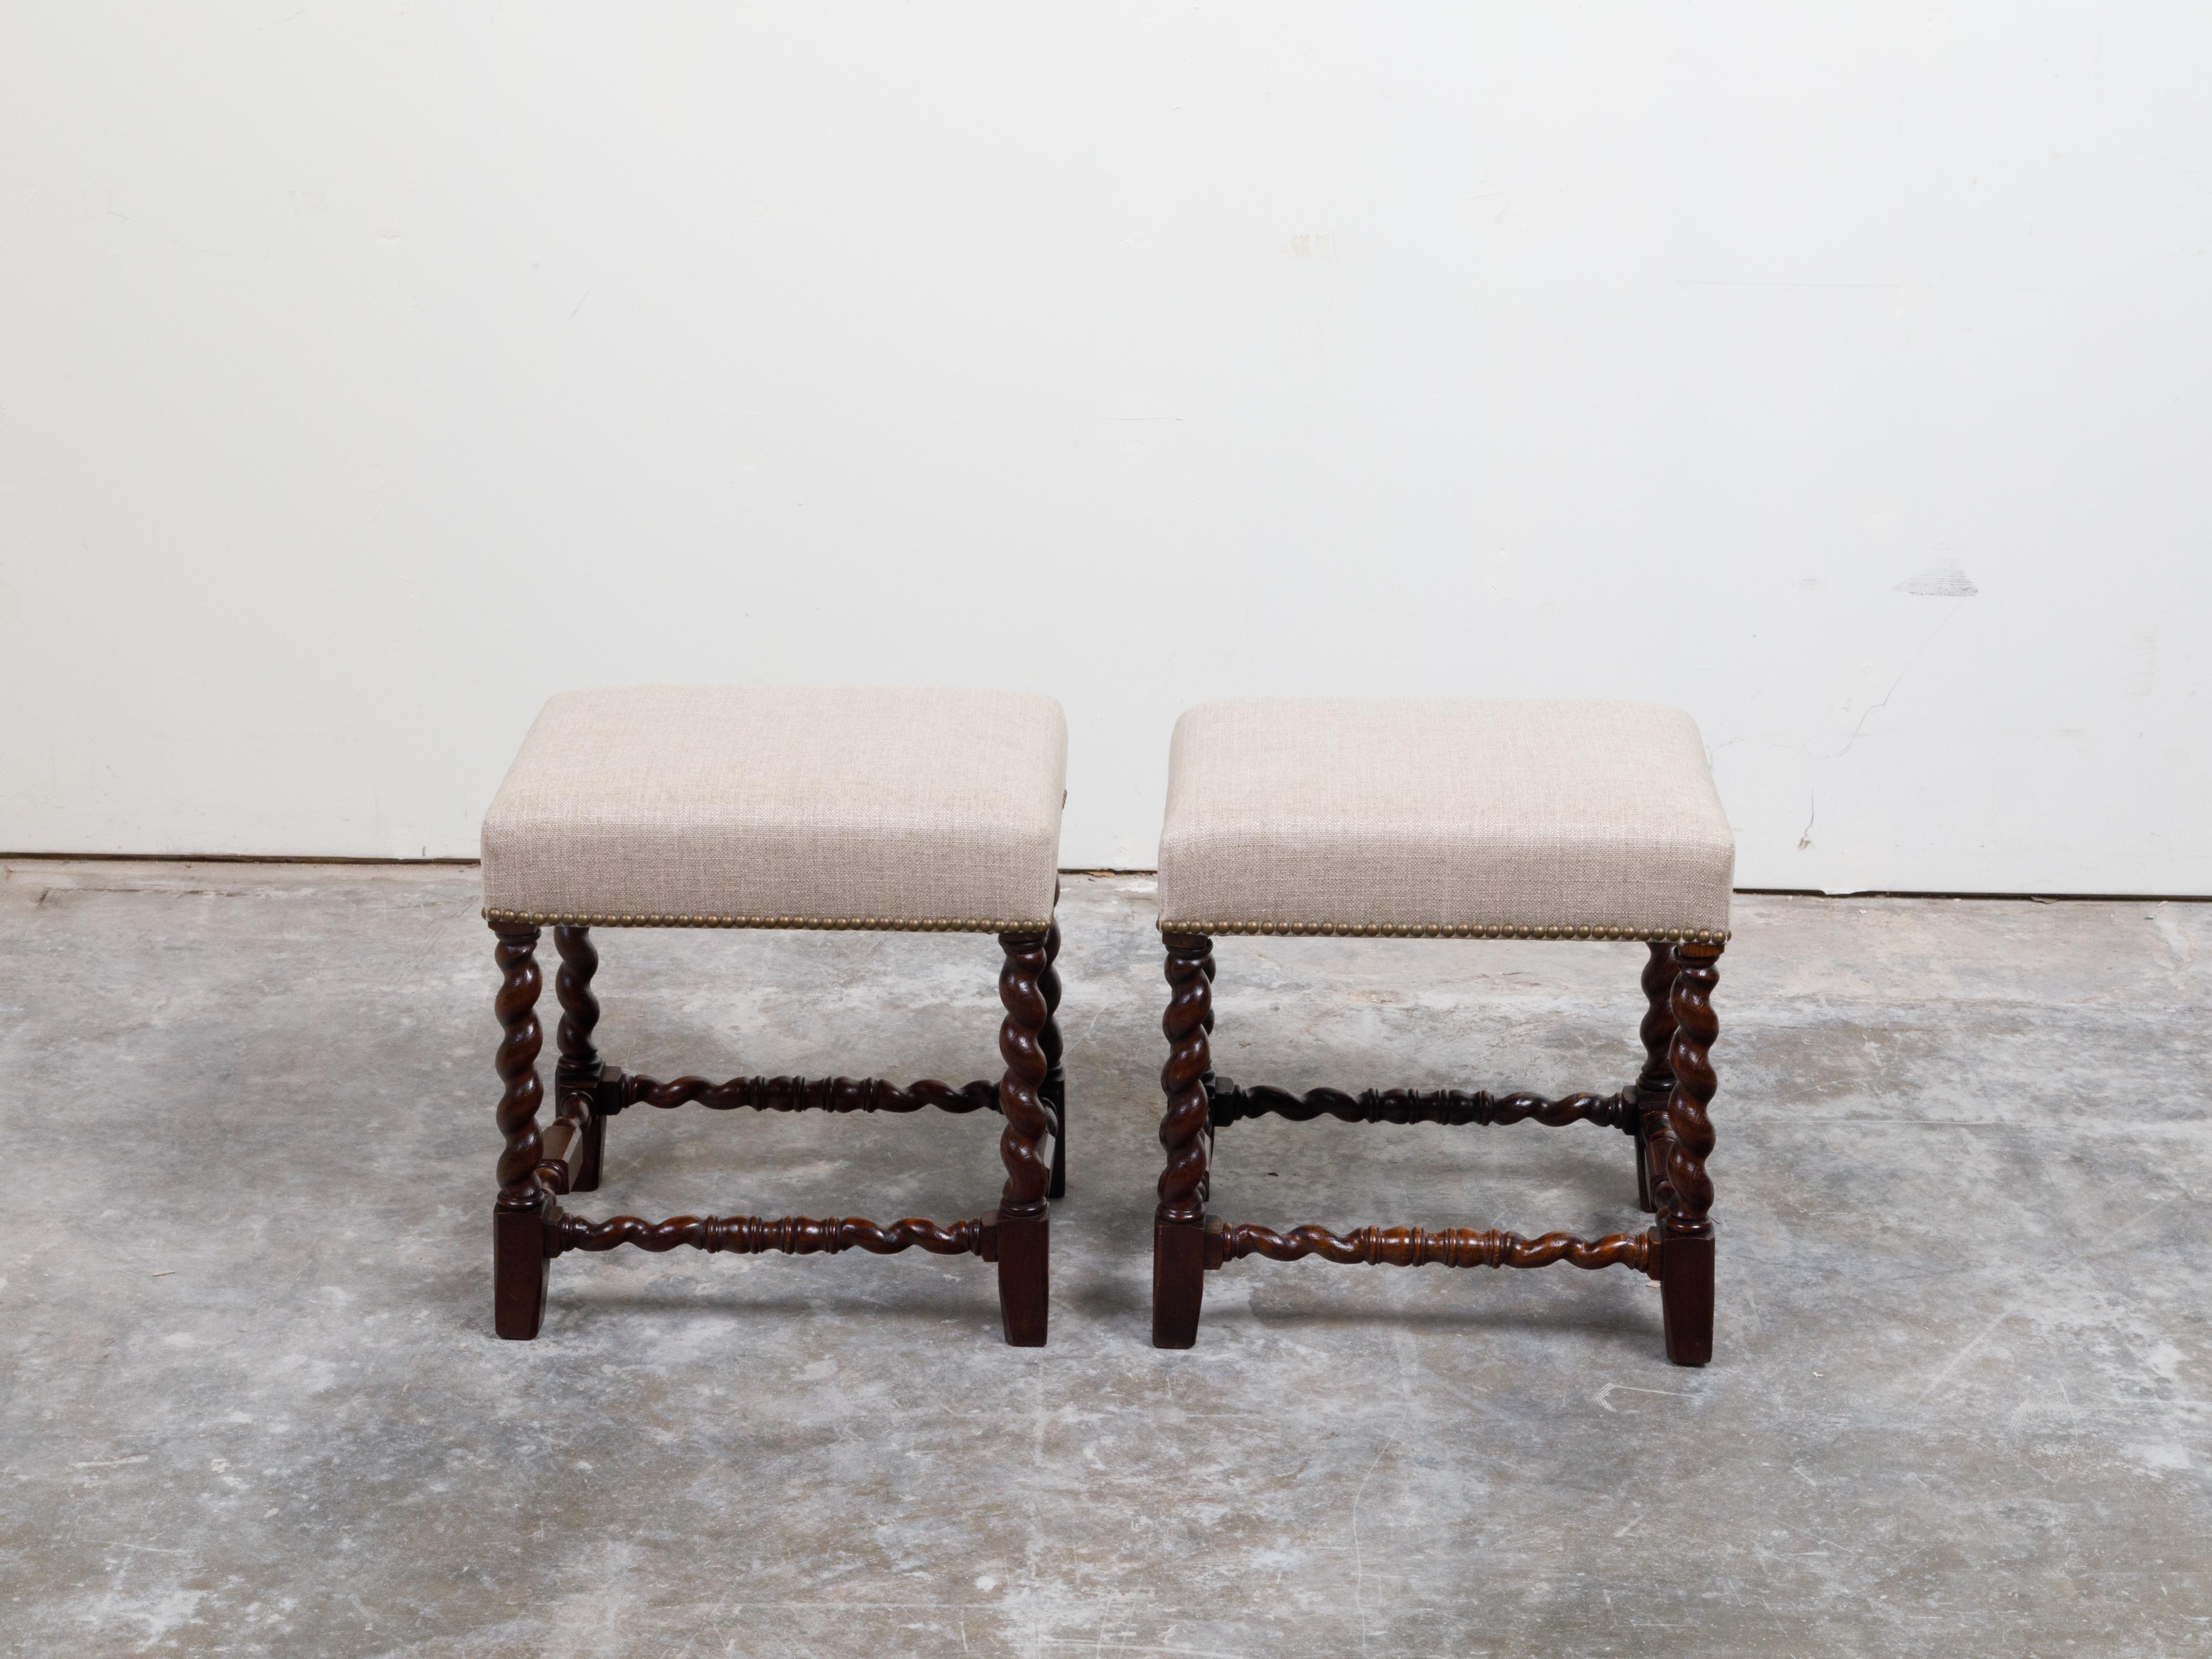 A pair of English oak stools from the early 20th century, with barley twist bases and new upholstery. Created in England during the early years of the 20th century, each of this pair of oak stools features a rectangular top newly reupholstered with